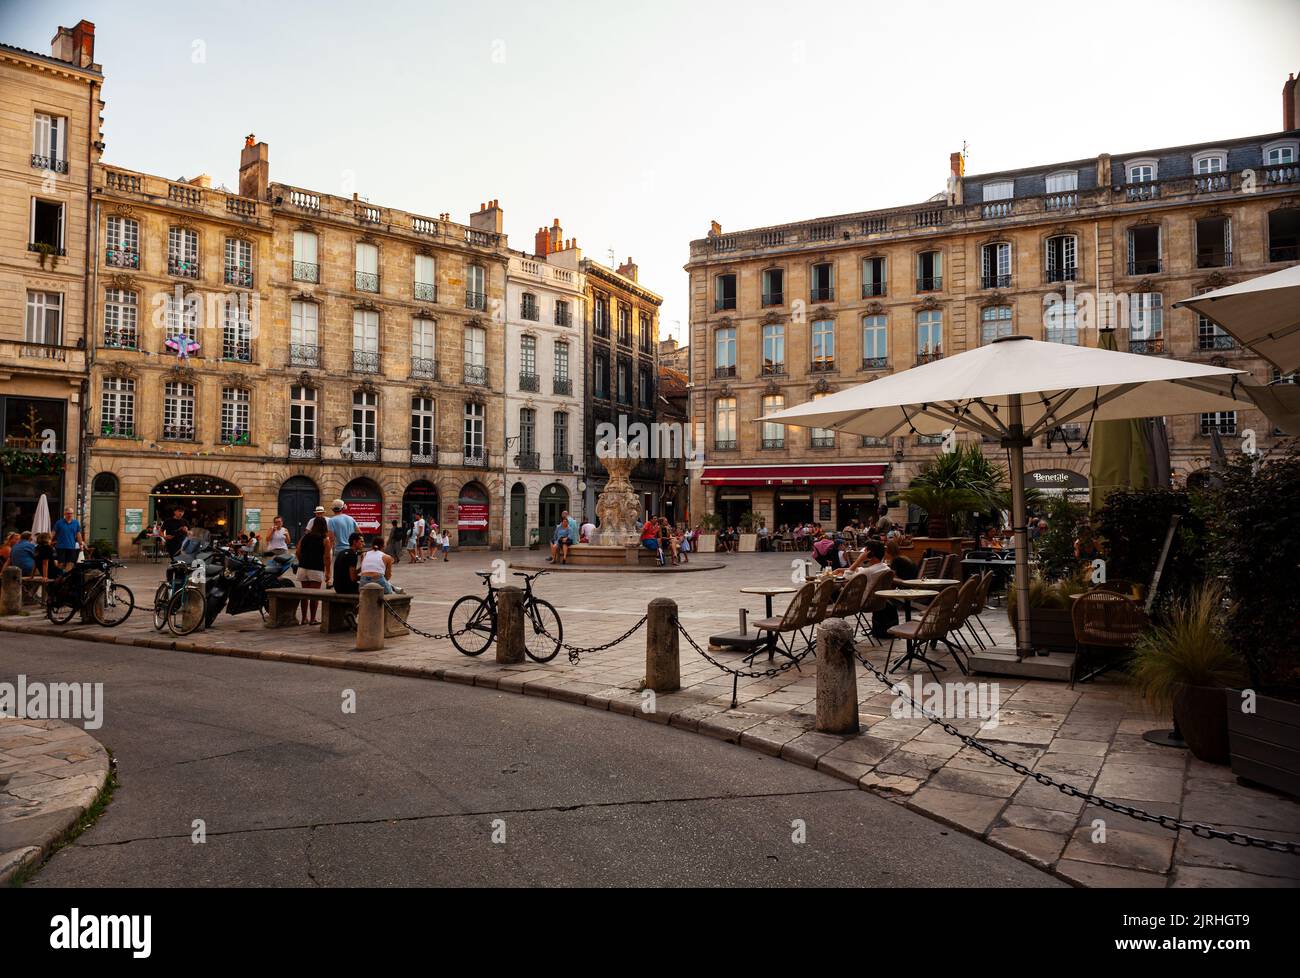 Bordeaux, France - July, 17: View of the Parliament Square or Place du Parlement. Historic square featuring an ornate fountain, cafes and restaurants Stock Photo